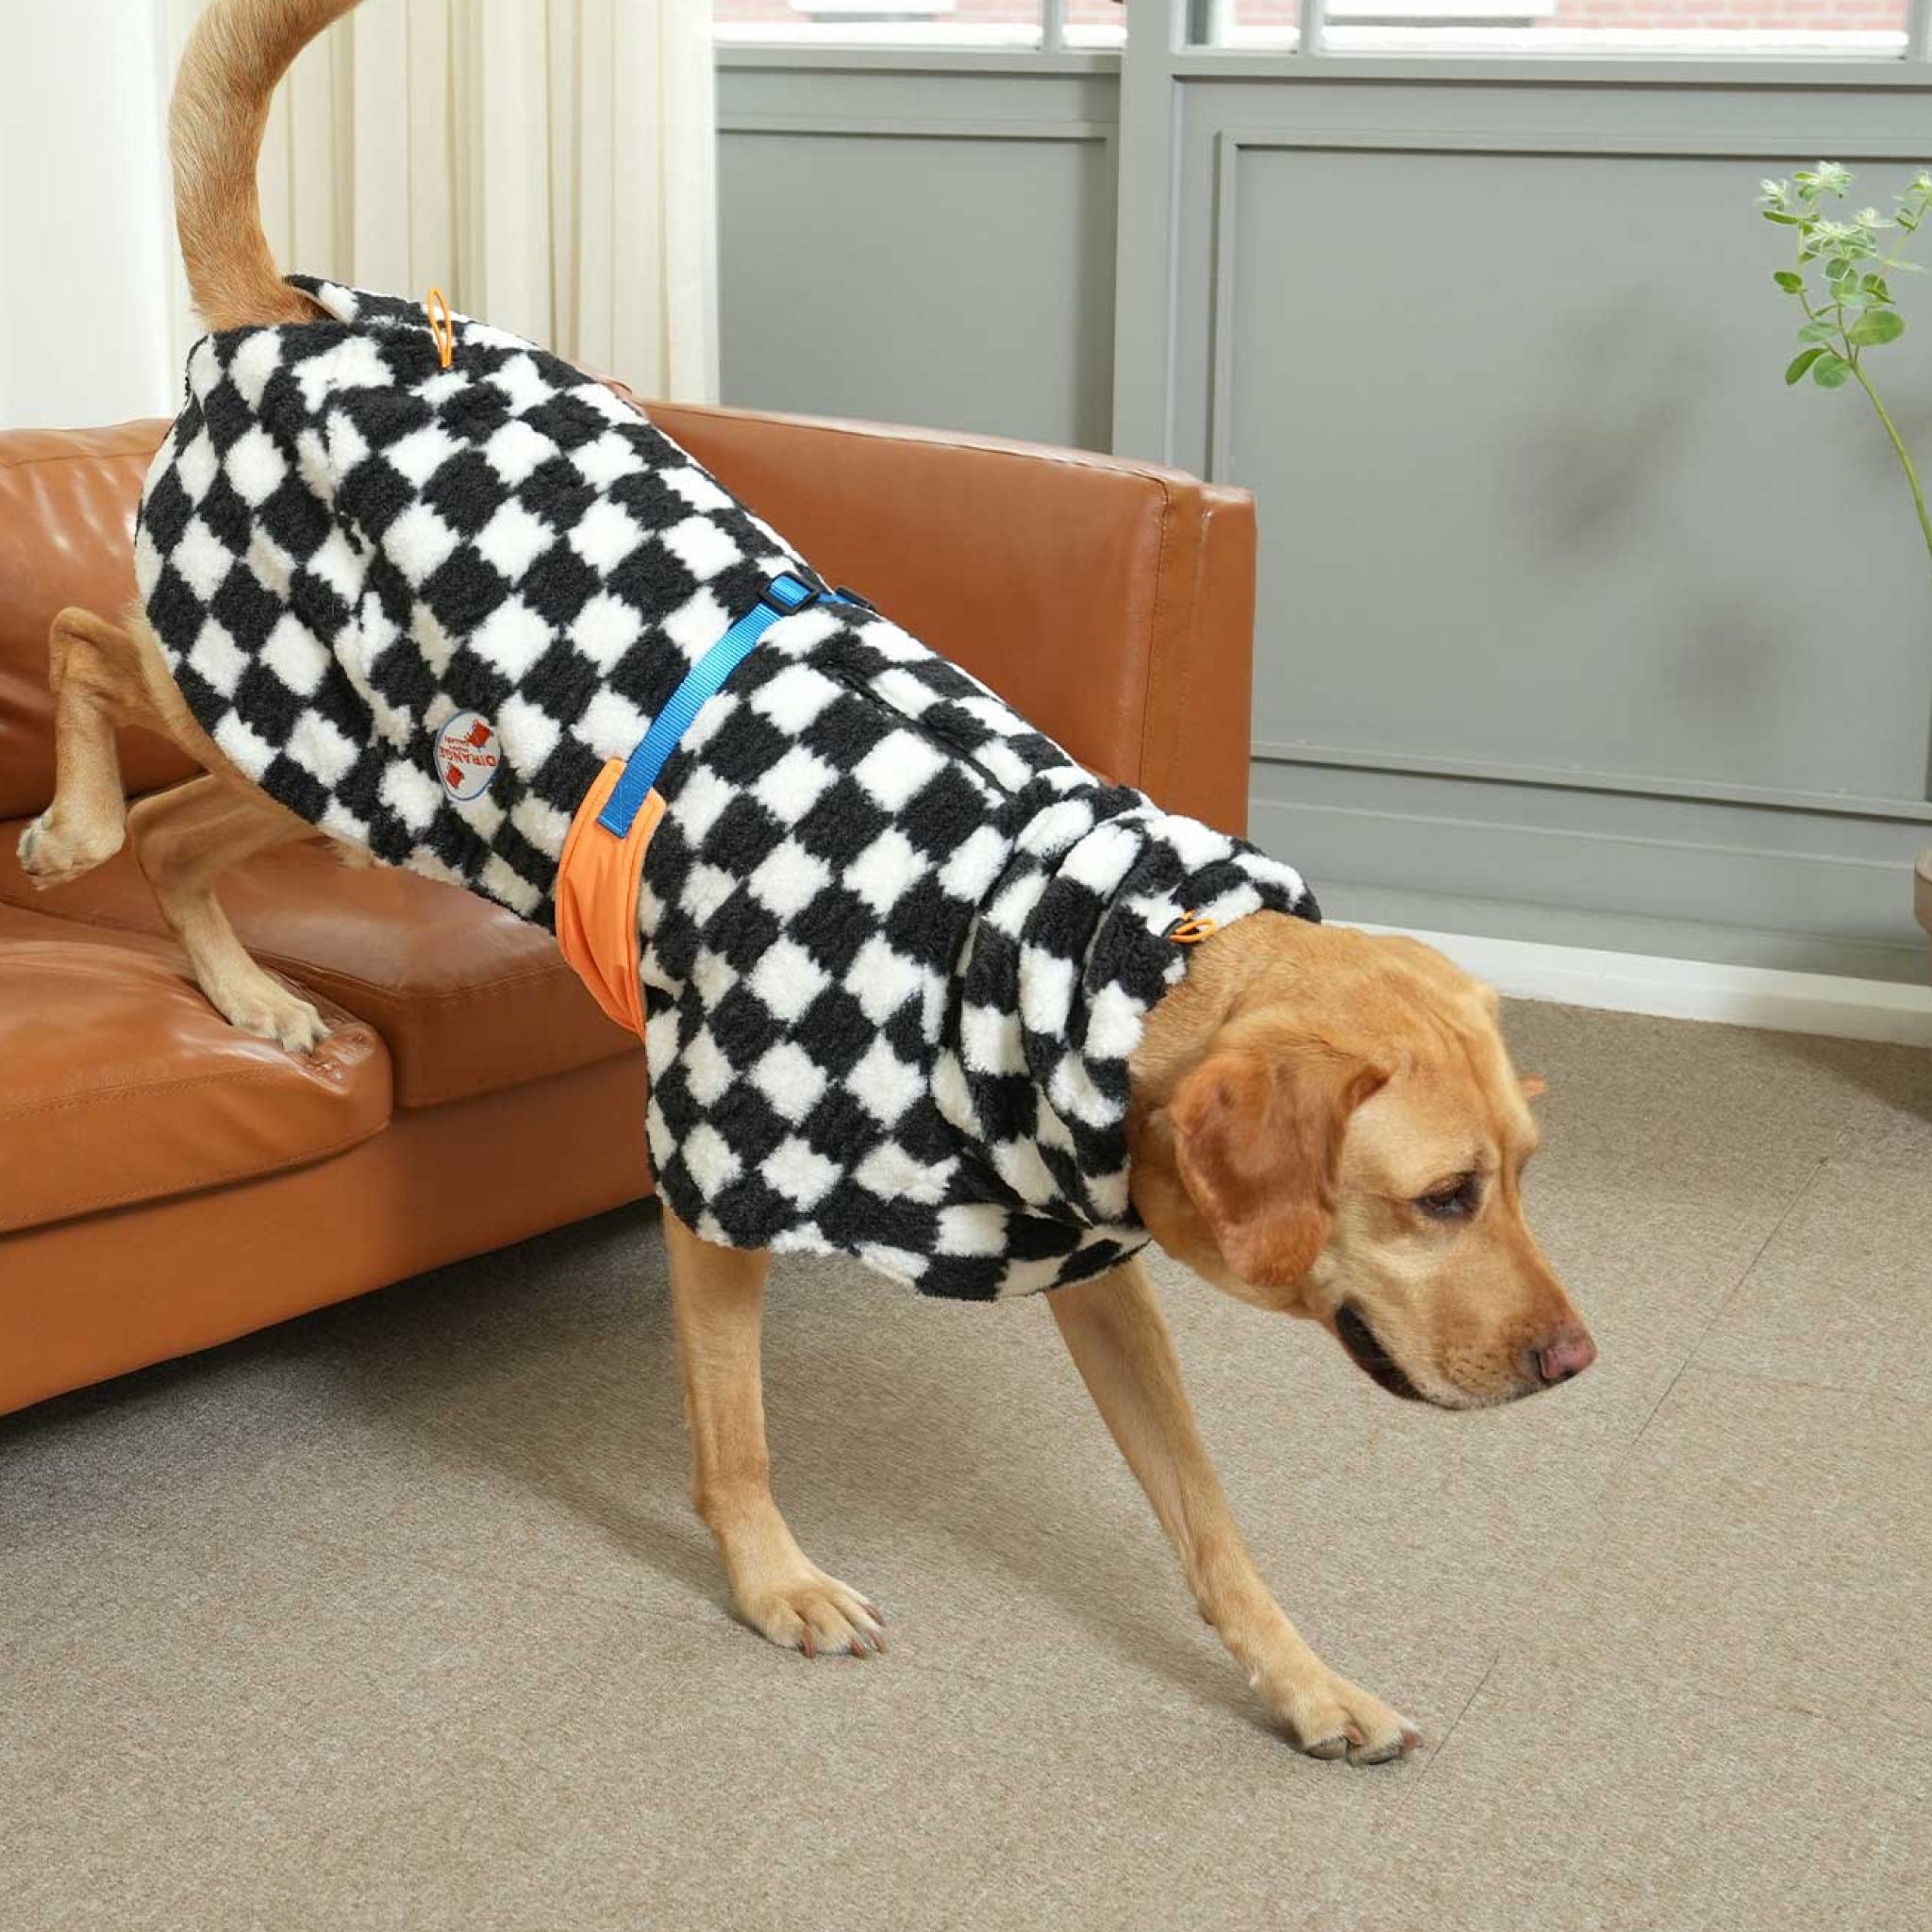 Dog wearing the black and white checkerboard fleece padding jacket